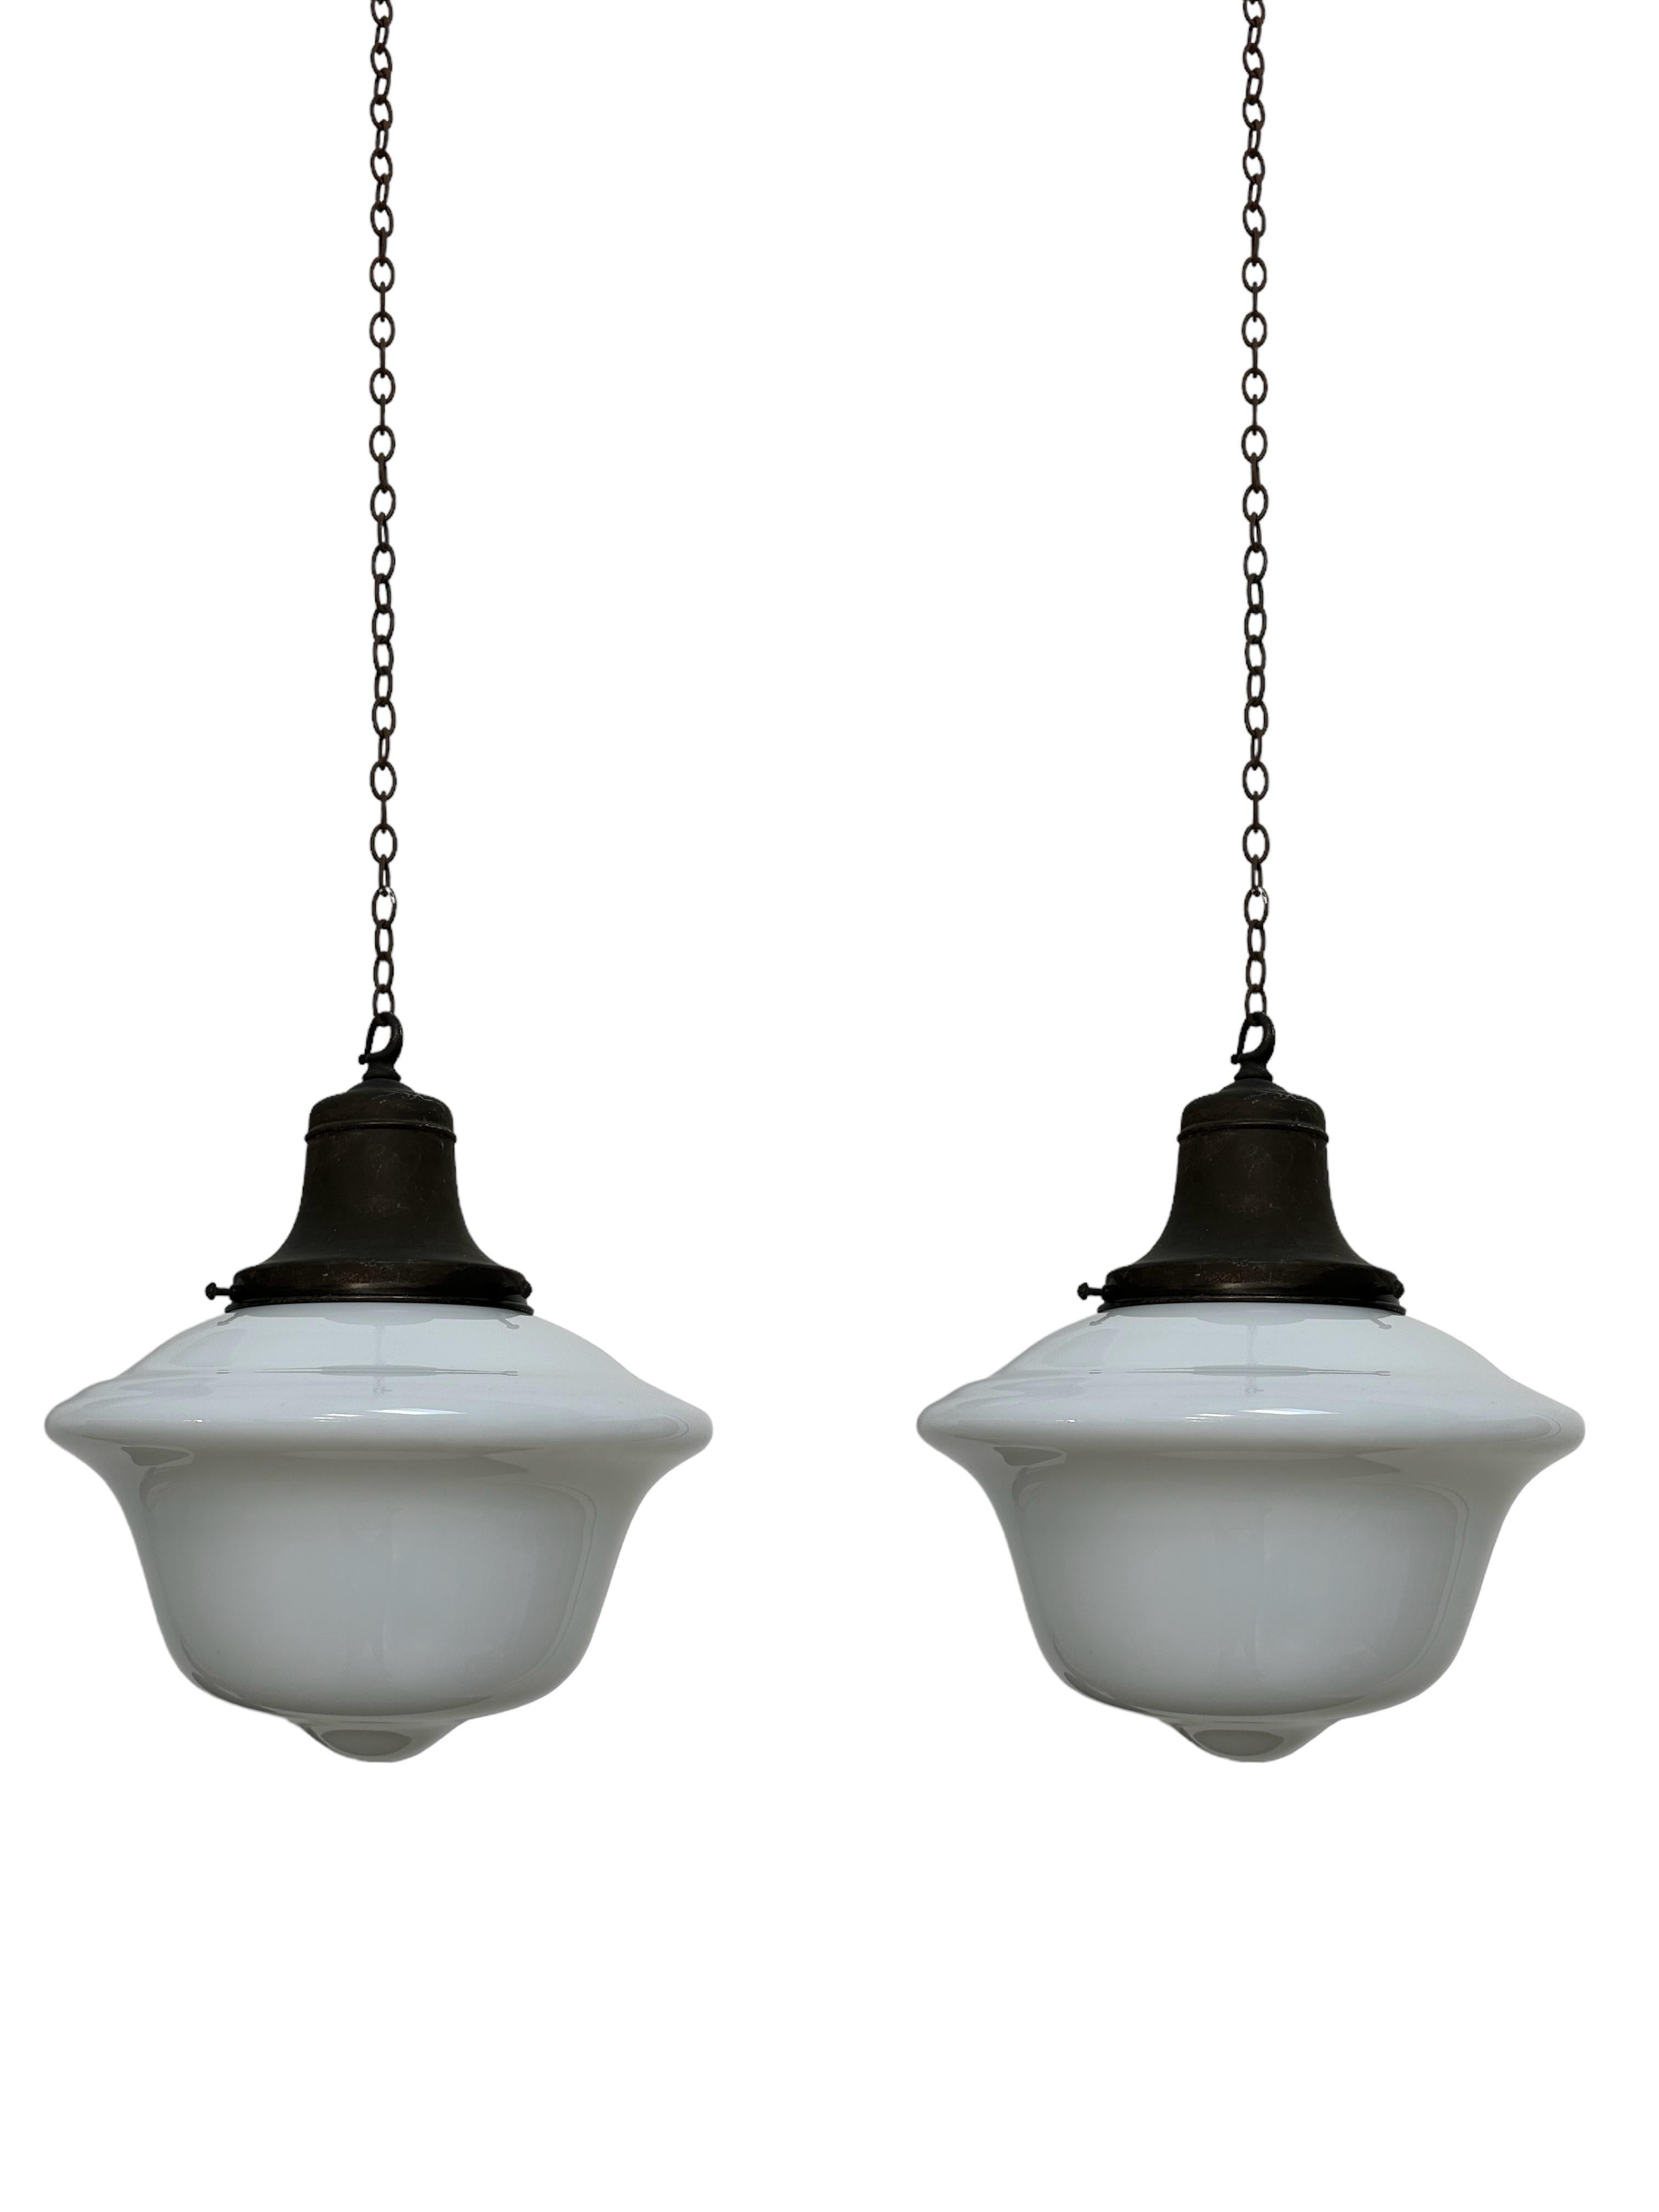 - A beautiful scarce run of school house opaline ceiling pendants with original galleries, England circa 1930.
- Wear commensurate with age, all in very good condition, lovely deep shape to the opaline glass.
- Rewired with dark brown braided flex